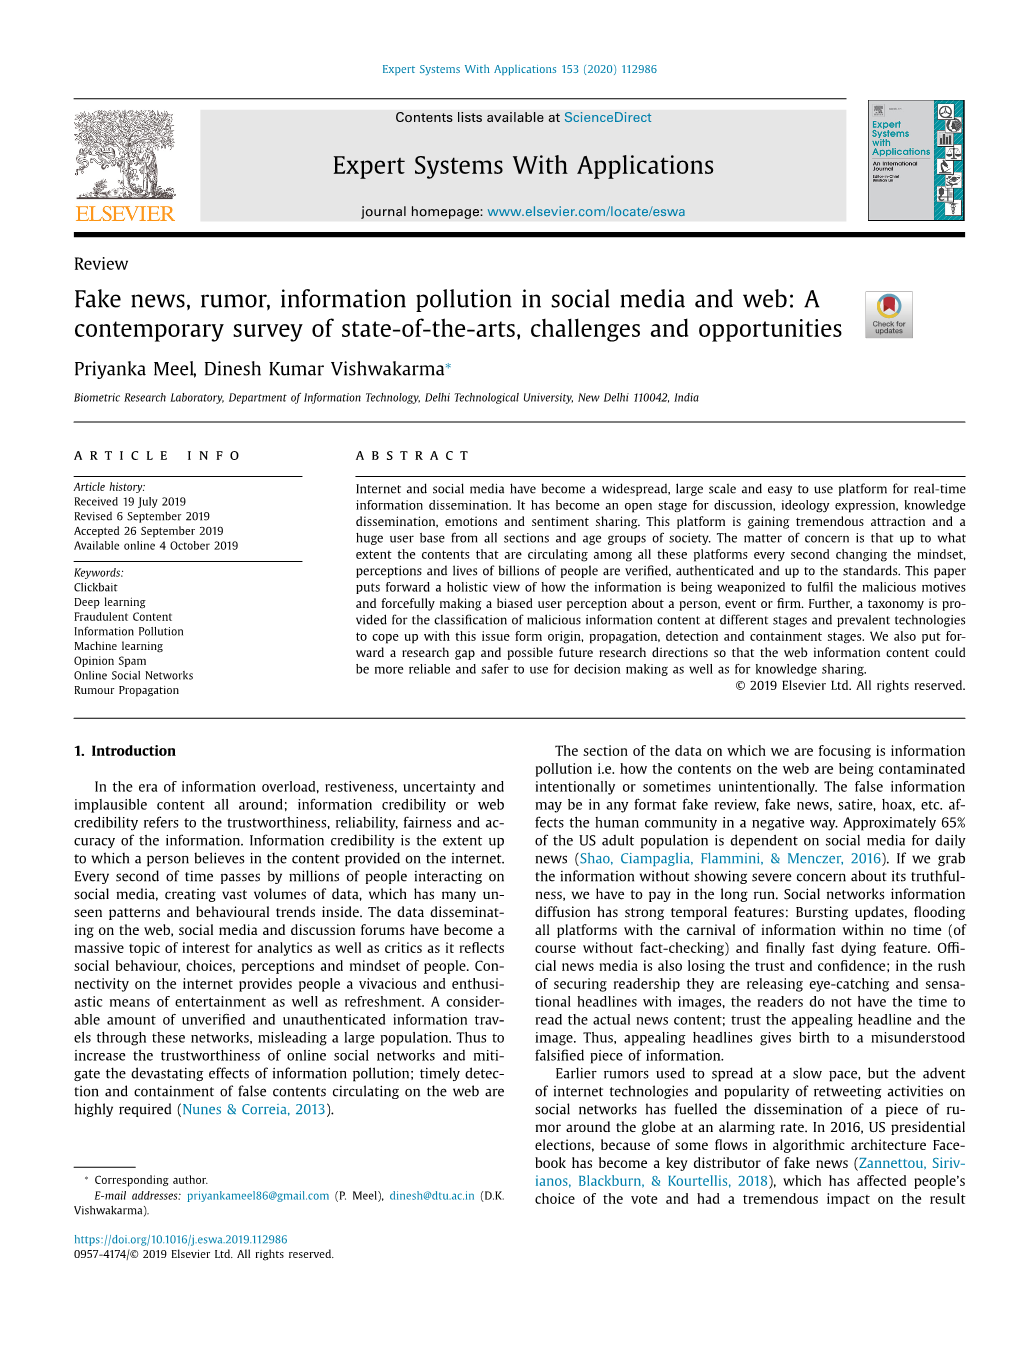 Fake News, Rumor, Information Pollution in Social Media and Web: a Contemporary Survey of State-Of-The-Arts, Challenges and Opportunities